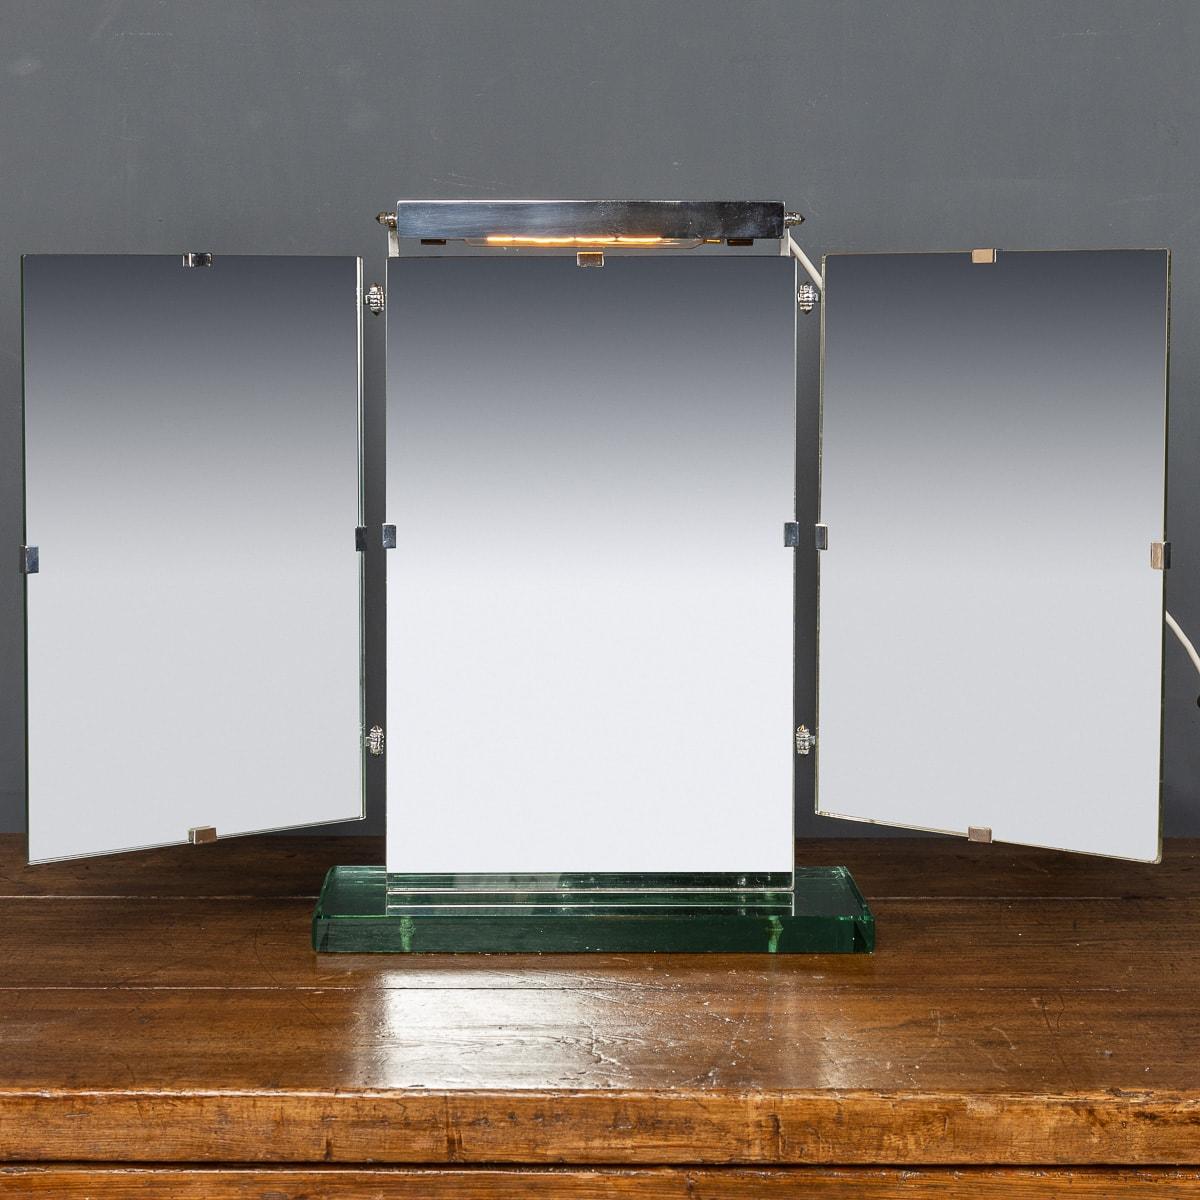 Antique early 20th Century An Deco tripple mirror with a heavy glass base to counter balance the weight of the three mirrors. This piece has a shade light above the centre mirror, circa 1930.

CONDITION
In Great Condition - wear consistent with